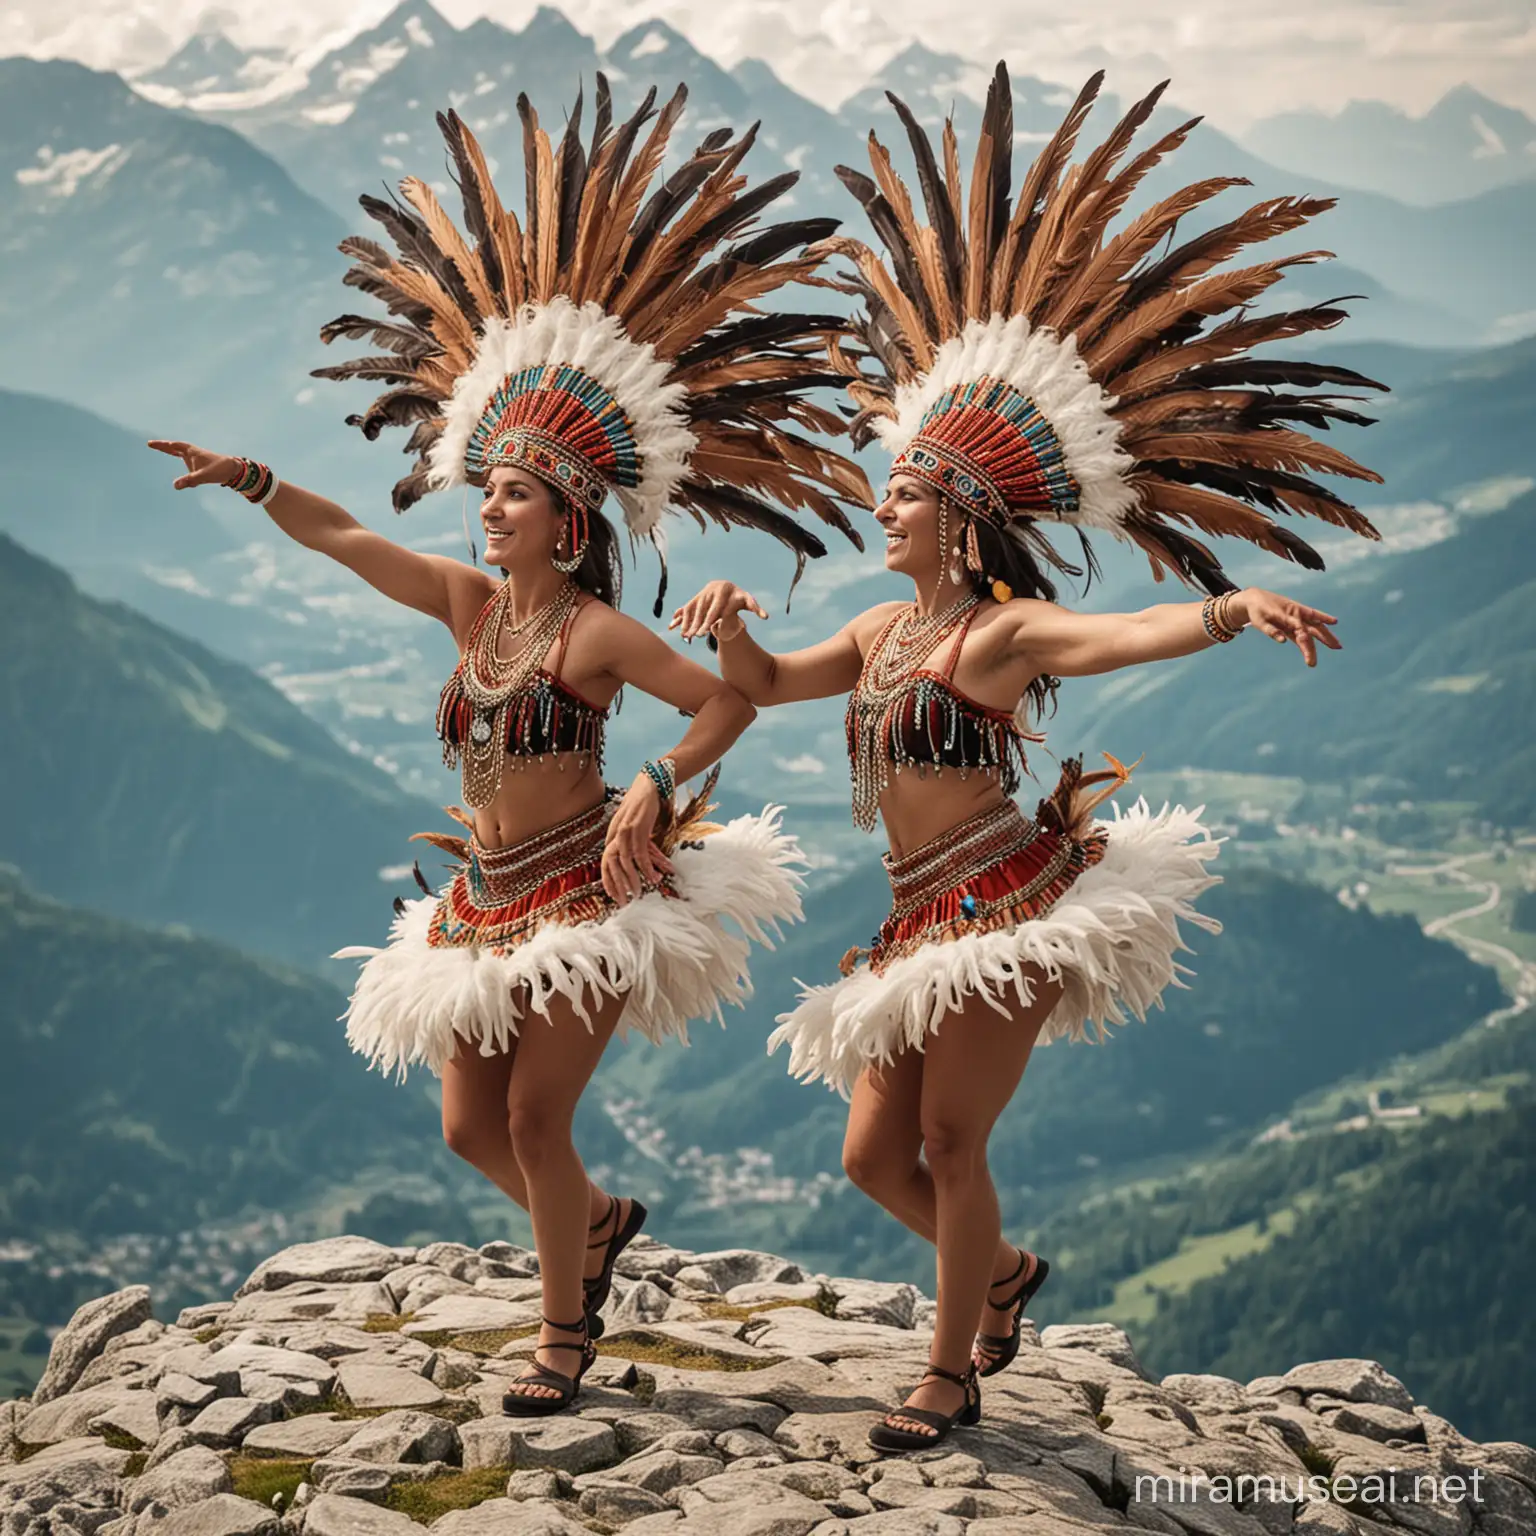 Feathered Headdress Dancers Perform on Swiss Mountaintop